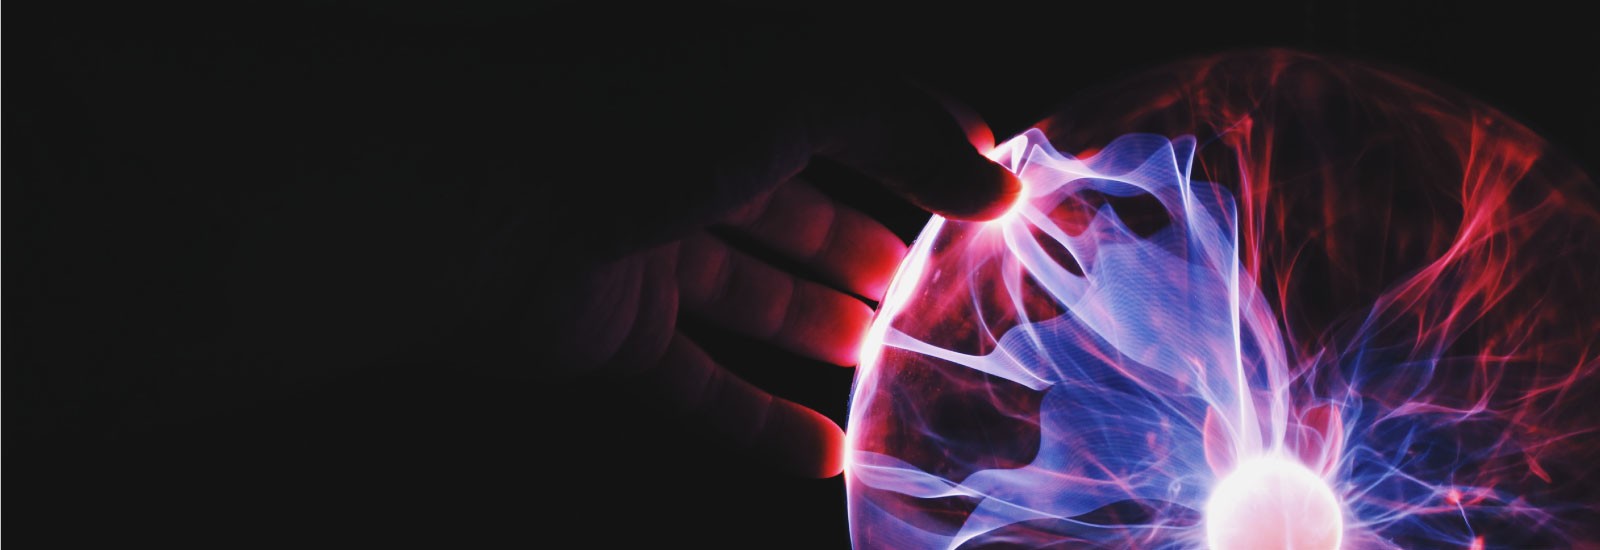 A hand is reaching out to a glass plasma ball.